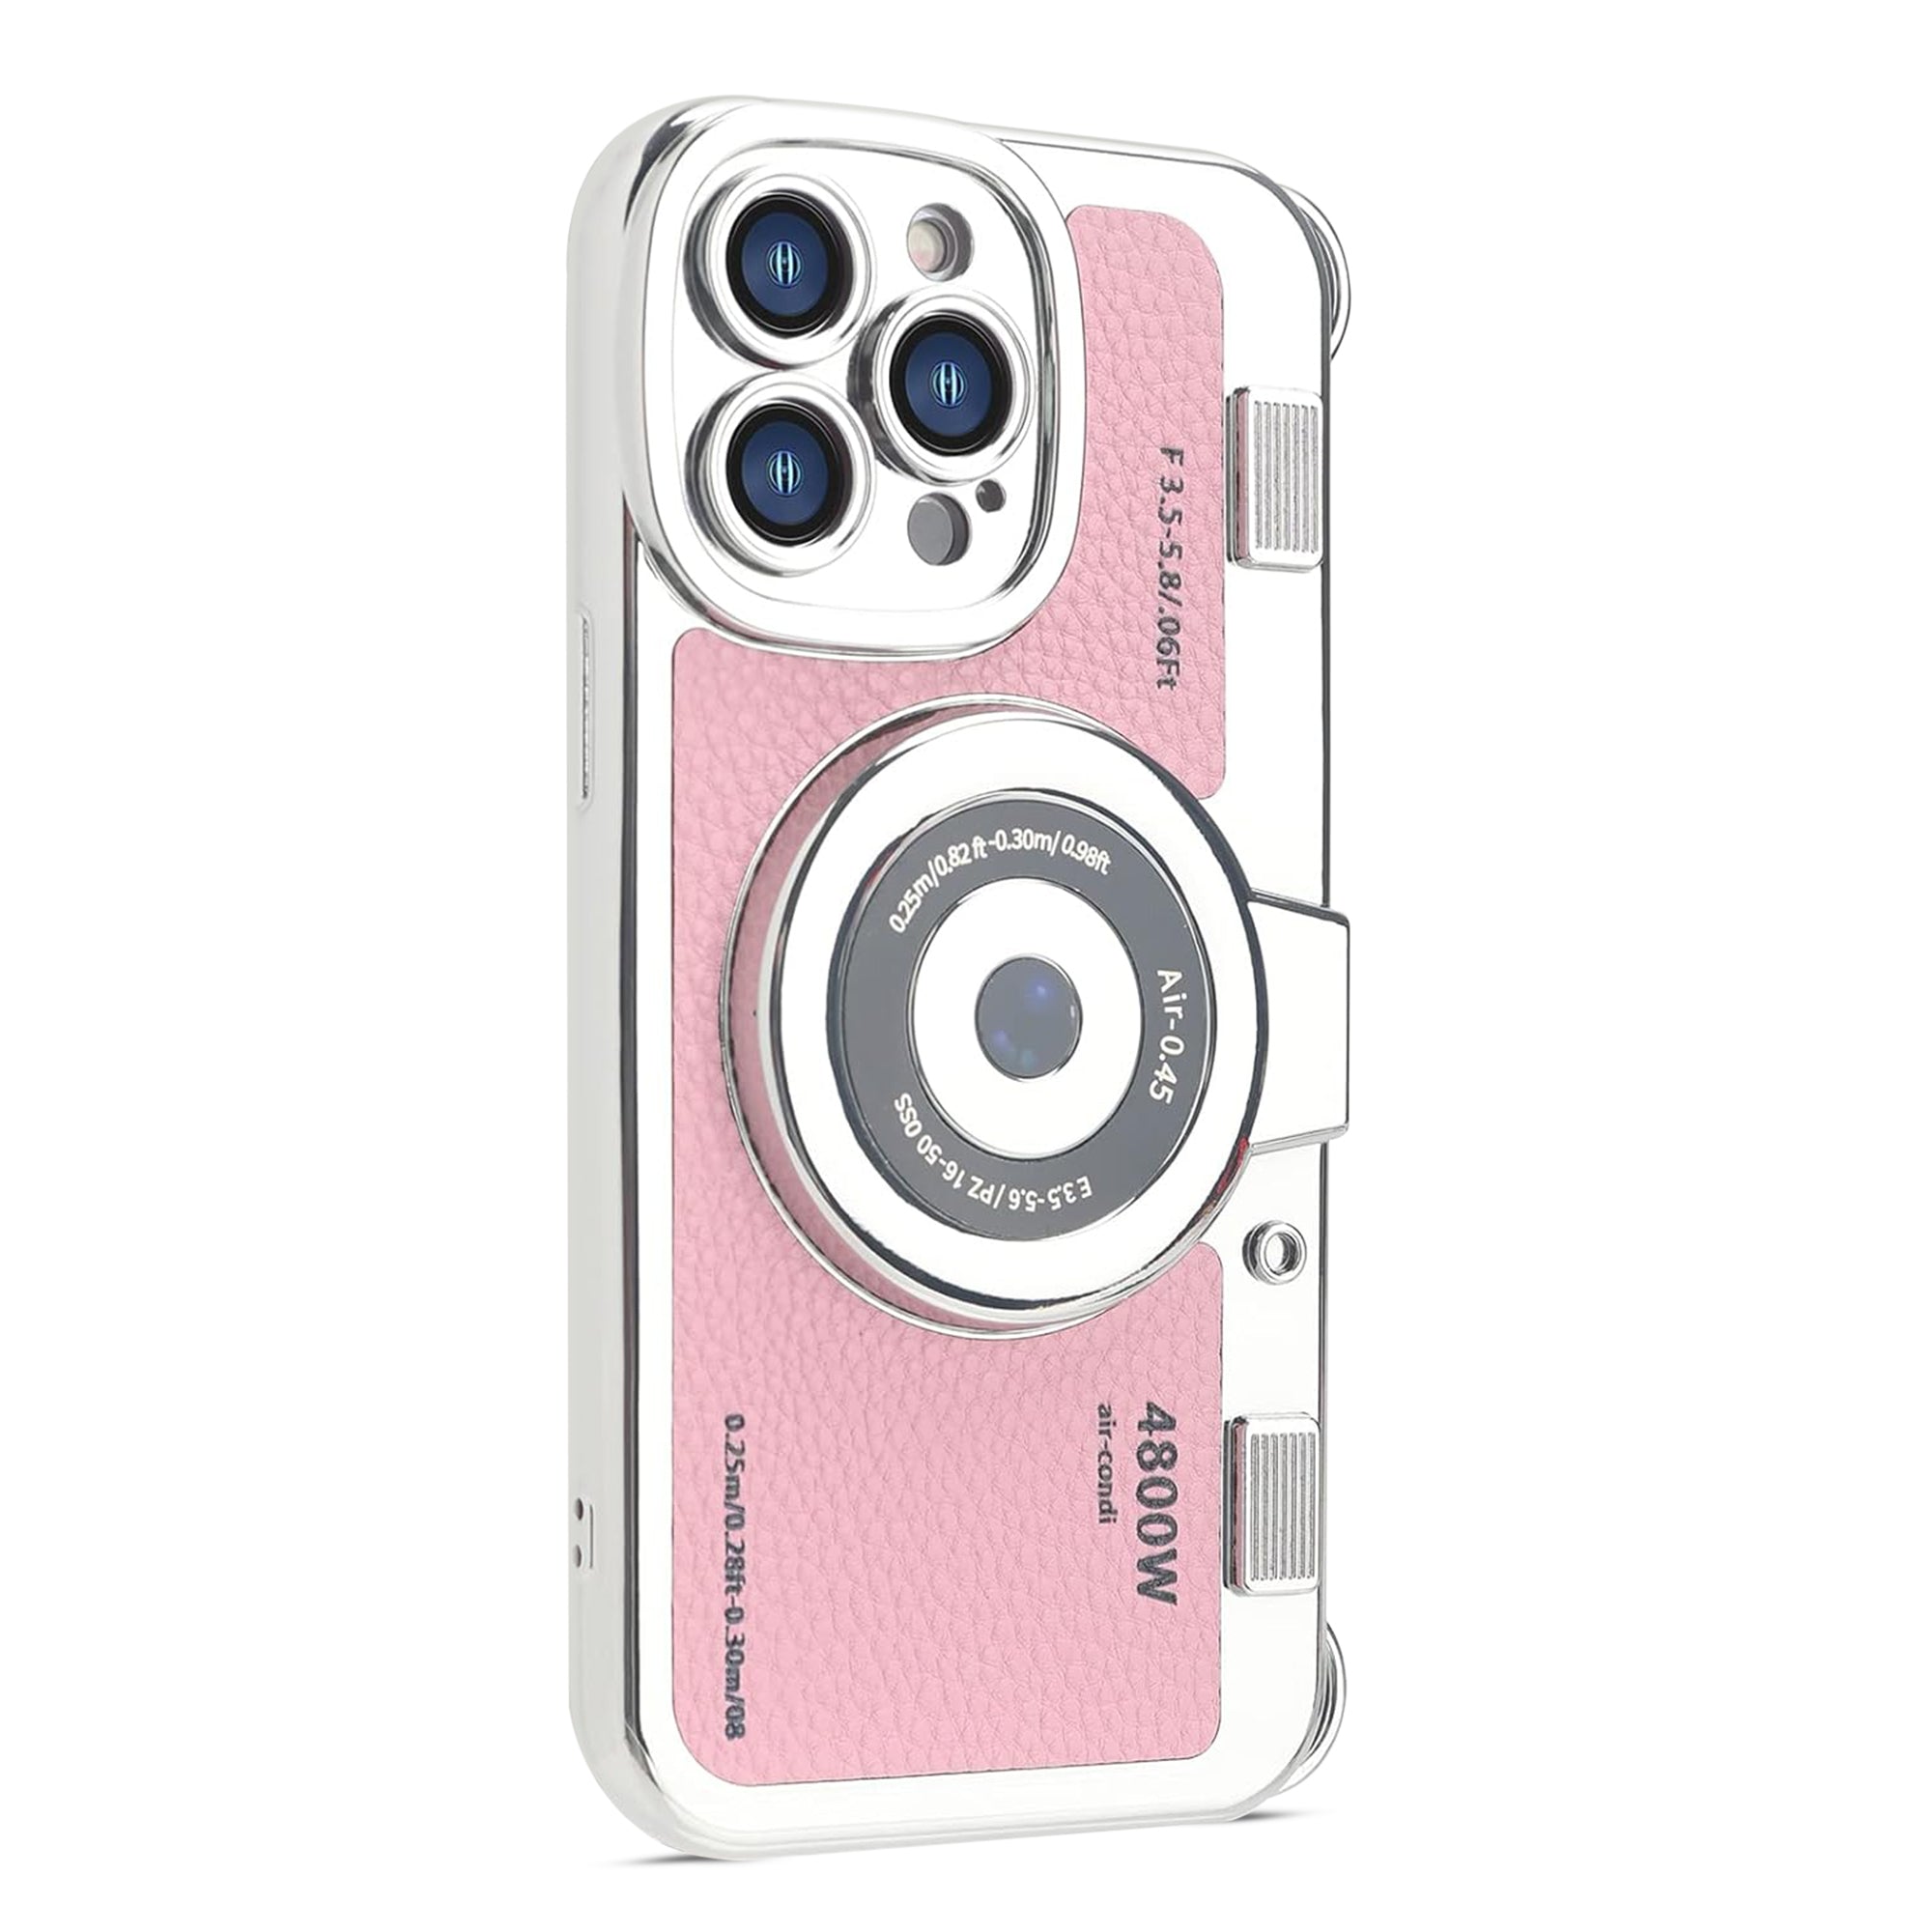 Cute 3D Vintage Camera Bag-Style Back Cover For Apple iPhone 13 Pro Max